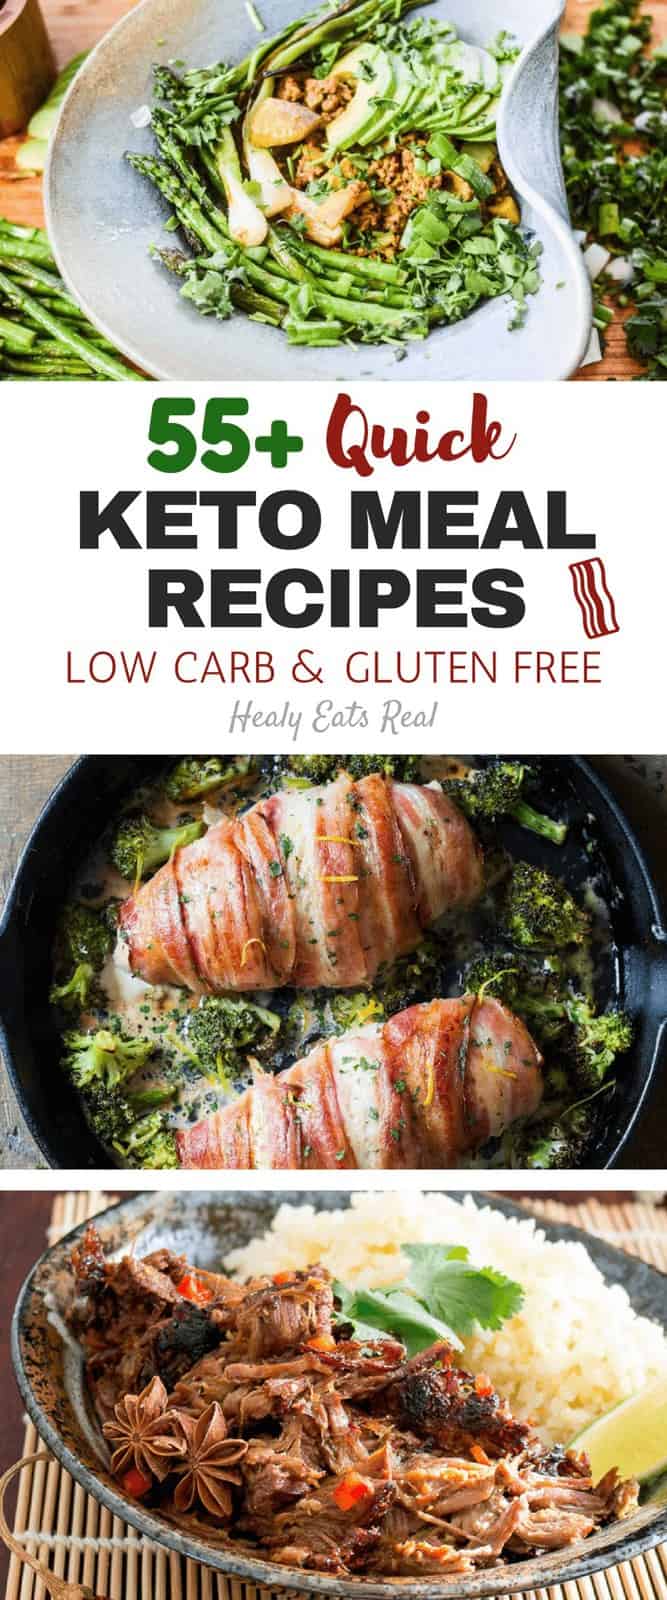 55+ Quick Keto Meal Recipes (Low Carb & Gluten Free)